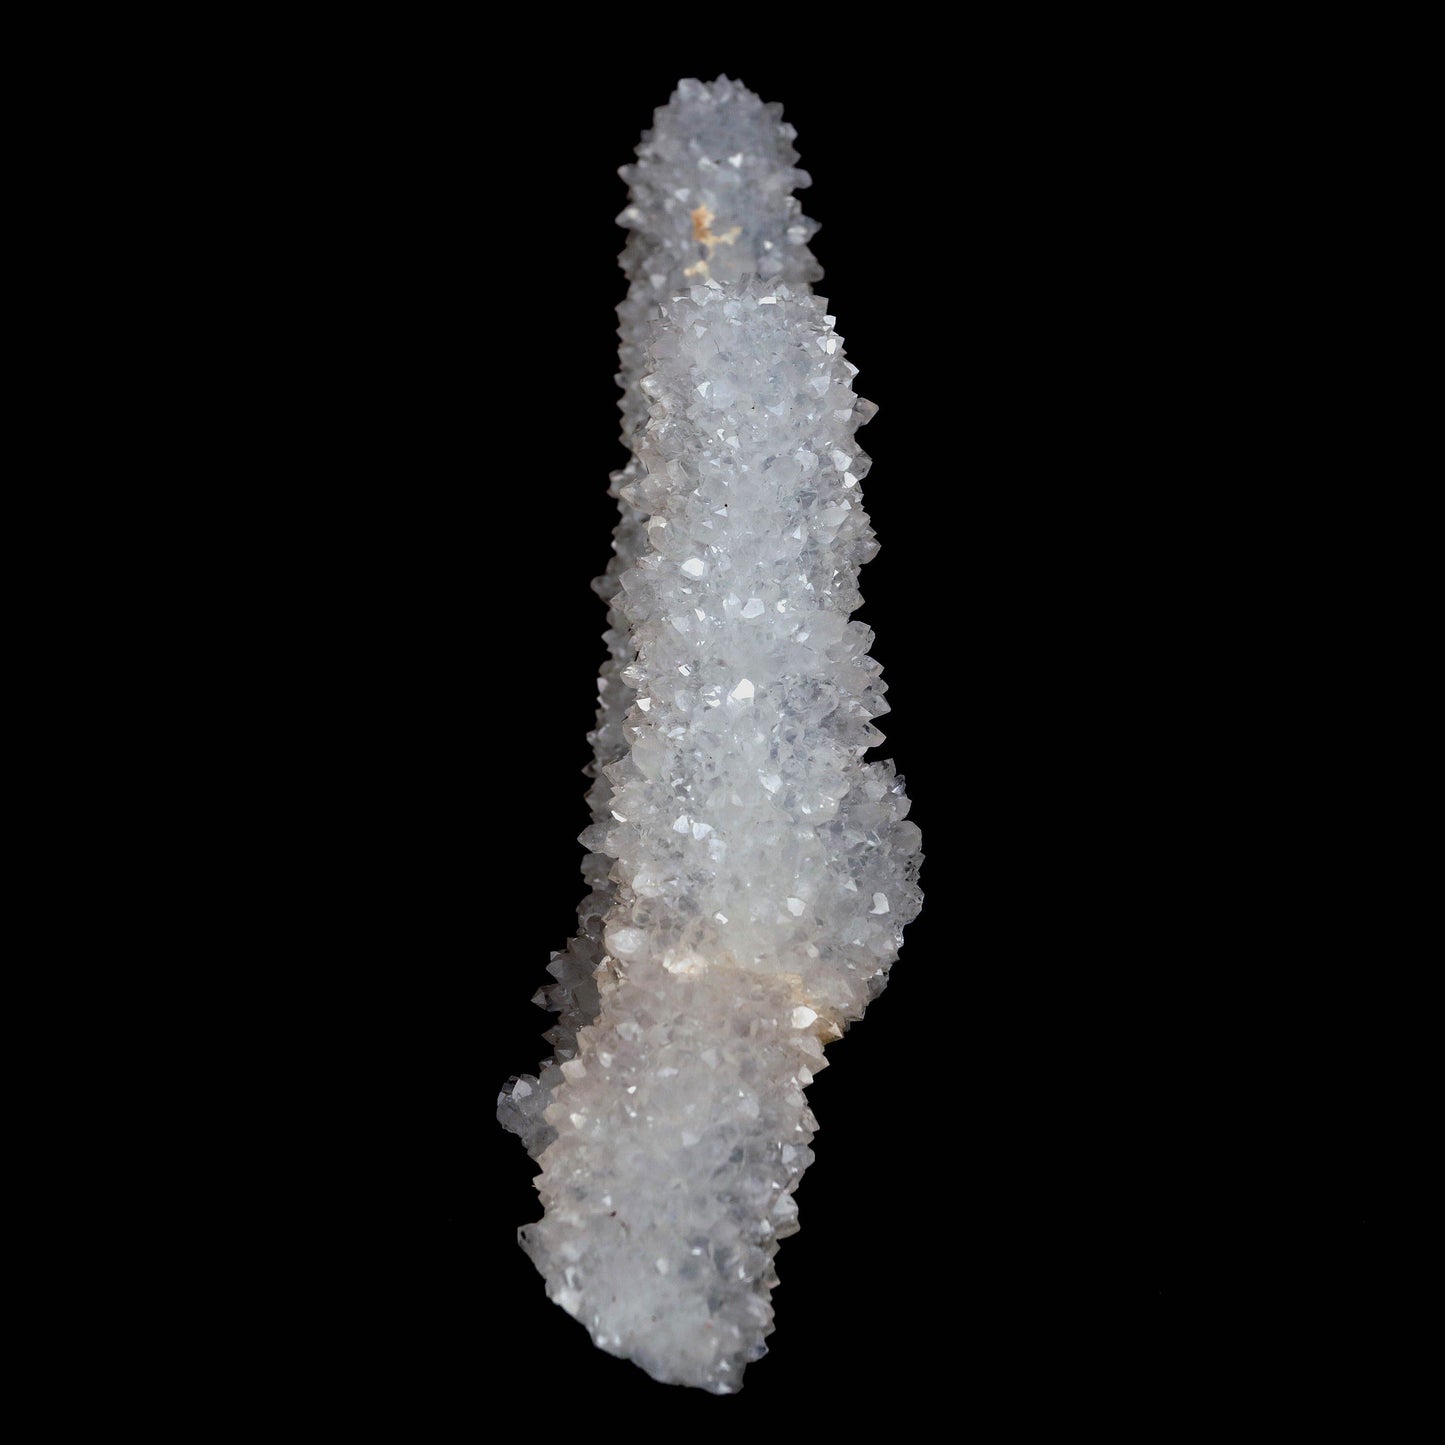 MM Quartz Sparkling Twin Stalactites Geode Natural Mineral Specimen #…  https://www.superbminerals.us/products/mm-quartz-sparkling-twin-stalactites-geode-natural-mineral-specimen-b-4623  Features: A very aesthetic specimen of transparent clear&nbsp; Quartz crystals completely covering all sides of a high stalactites as well as two smaller adjoining stalactites, making for great symmetry. A beautiful showy piece in excellent condition.Primary Mineral(s): MM Quartz